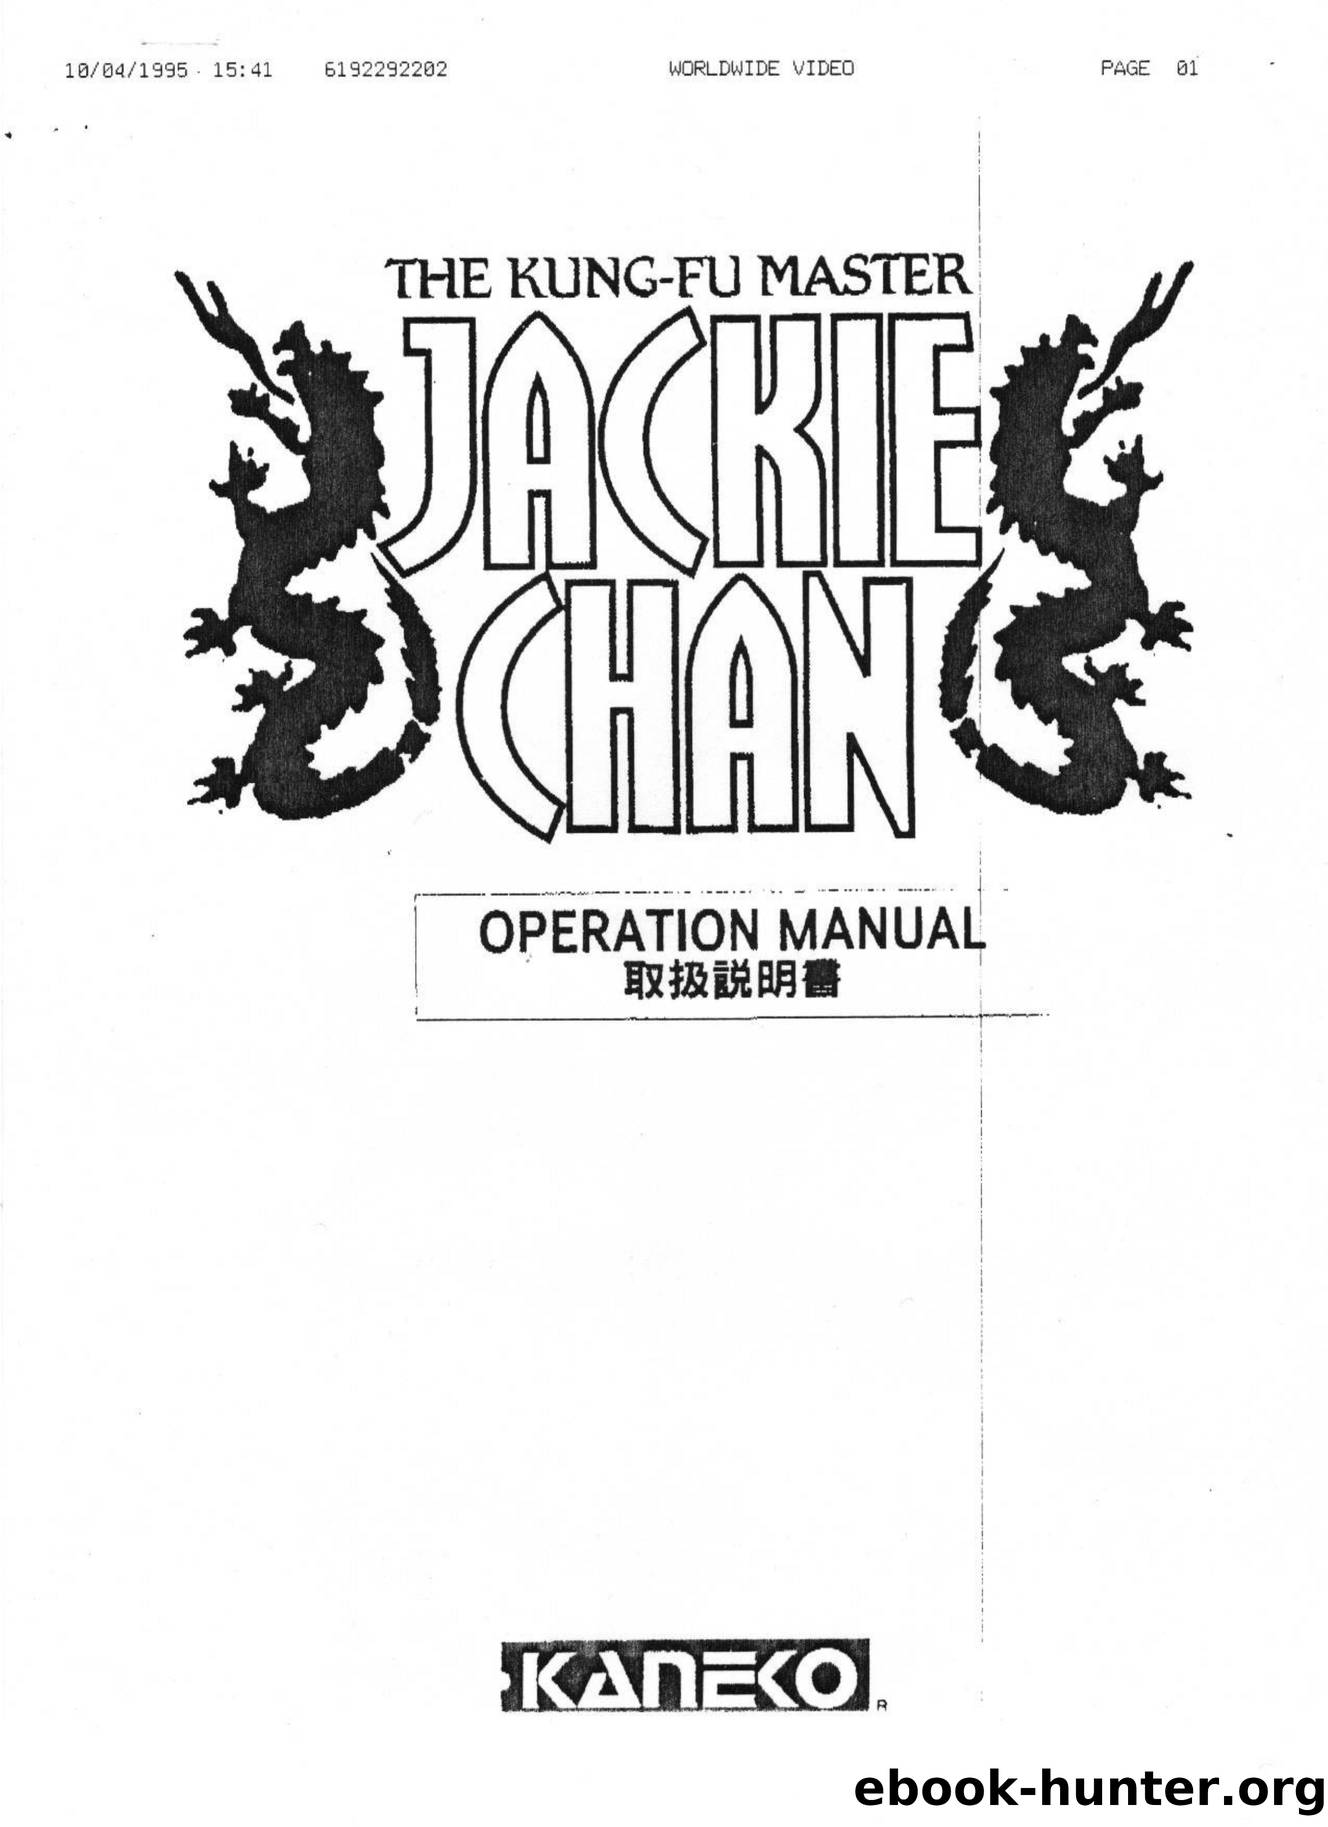 Jackie Chan The Kung-Fu Master Operation Manual by RColtrane